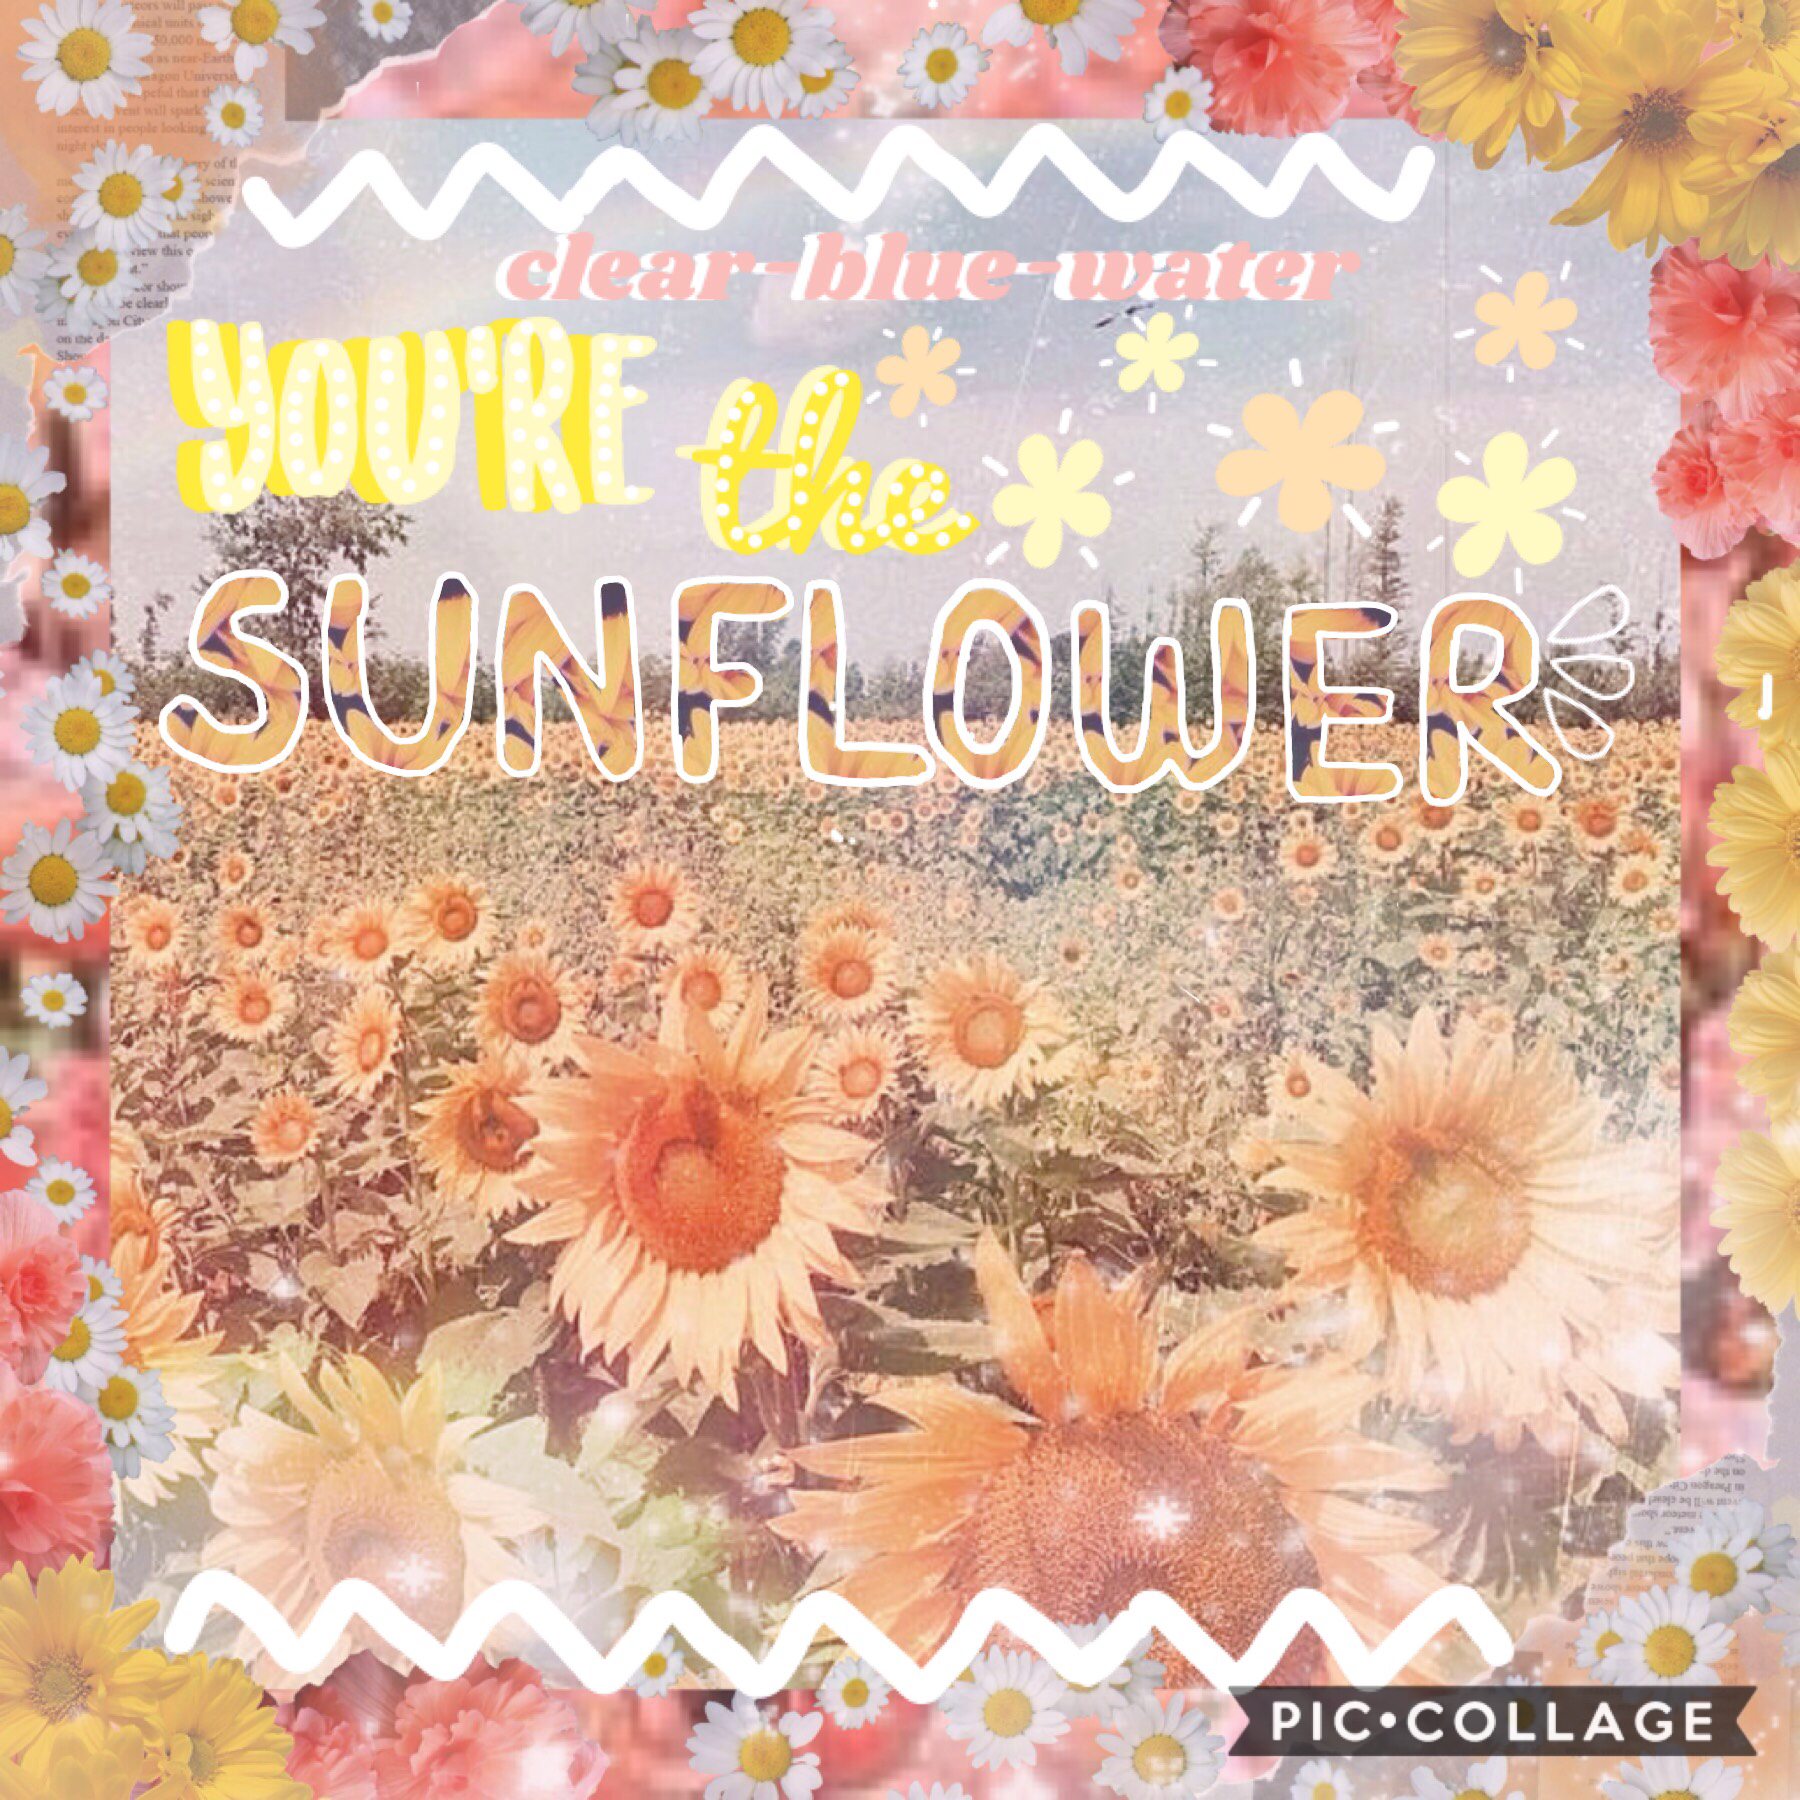 🌻T A P🌻
Entry to lem0nayde's contest. This is inspired MyCastleCrumbledOvernight who has a contest going on right now which you should totally go enter.
QOTD: What are you doing this weekend?
AOTD: I have 2 dance performances.